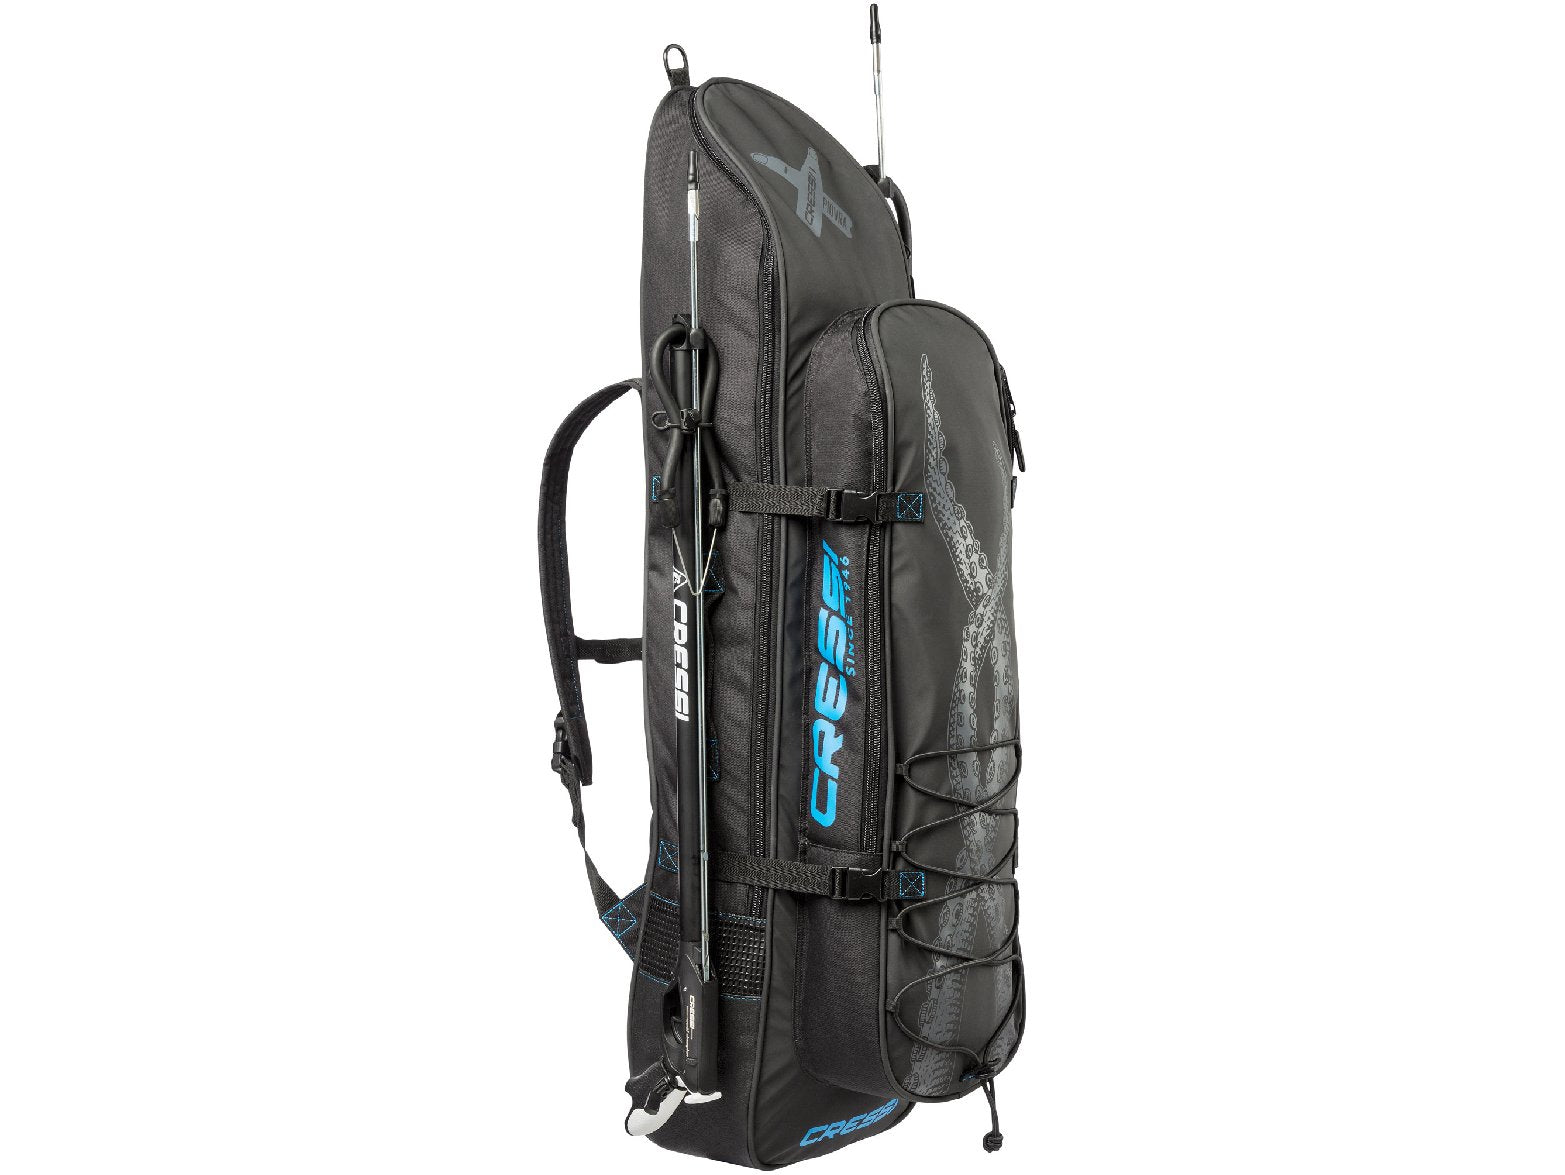 Piovra Fins Backpack